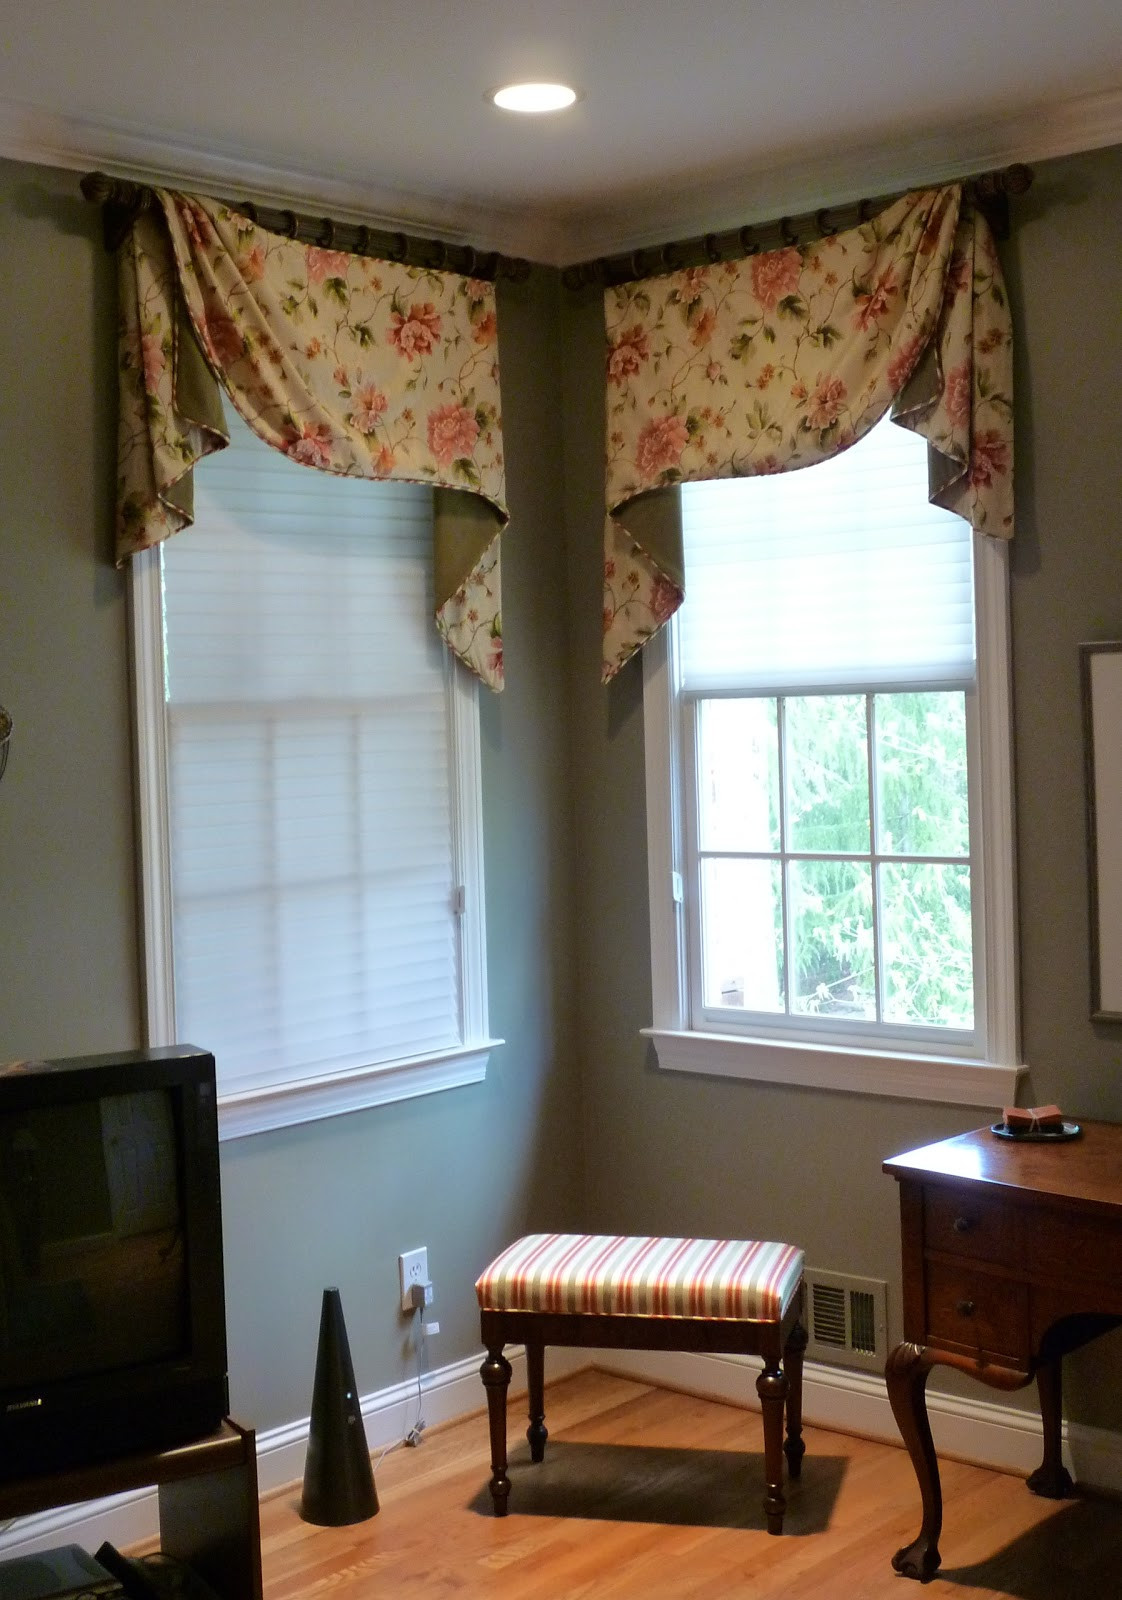 Curtains For Small Bedroom Windows
 Youngblood Interiors Corner Window Treatments for the